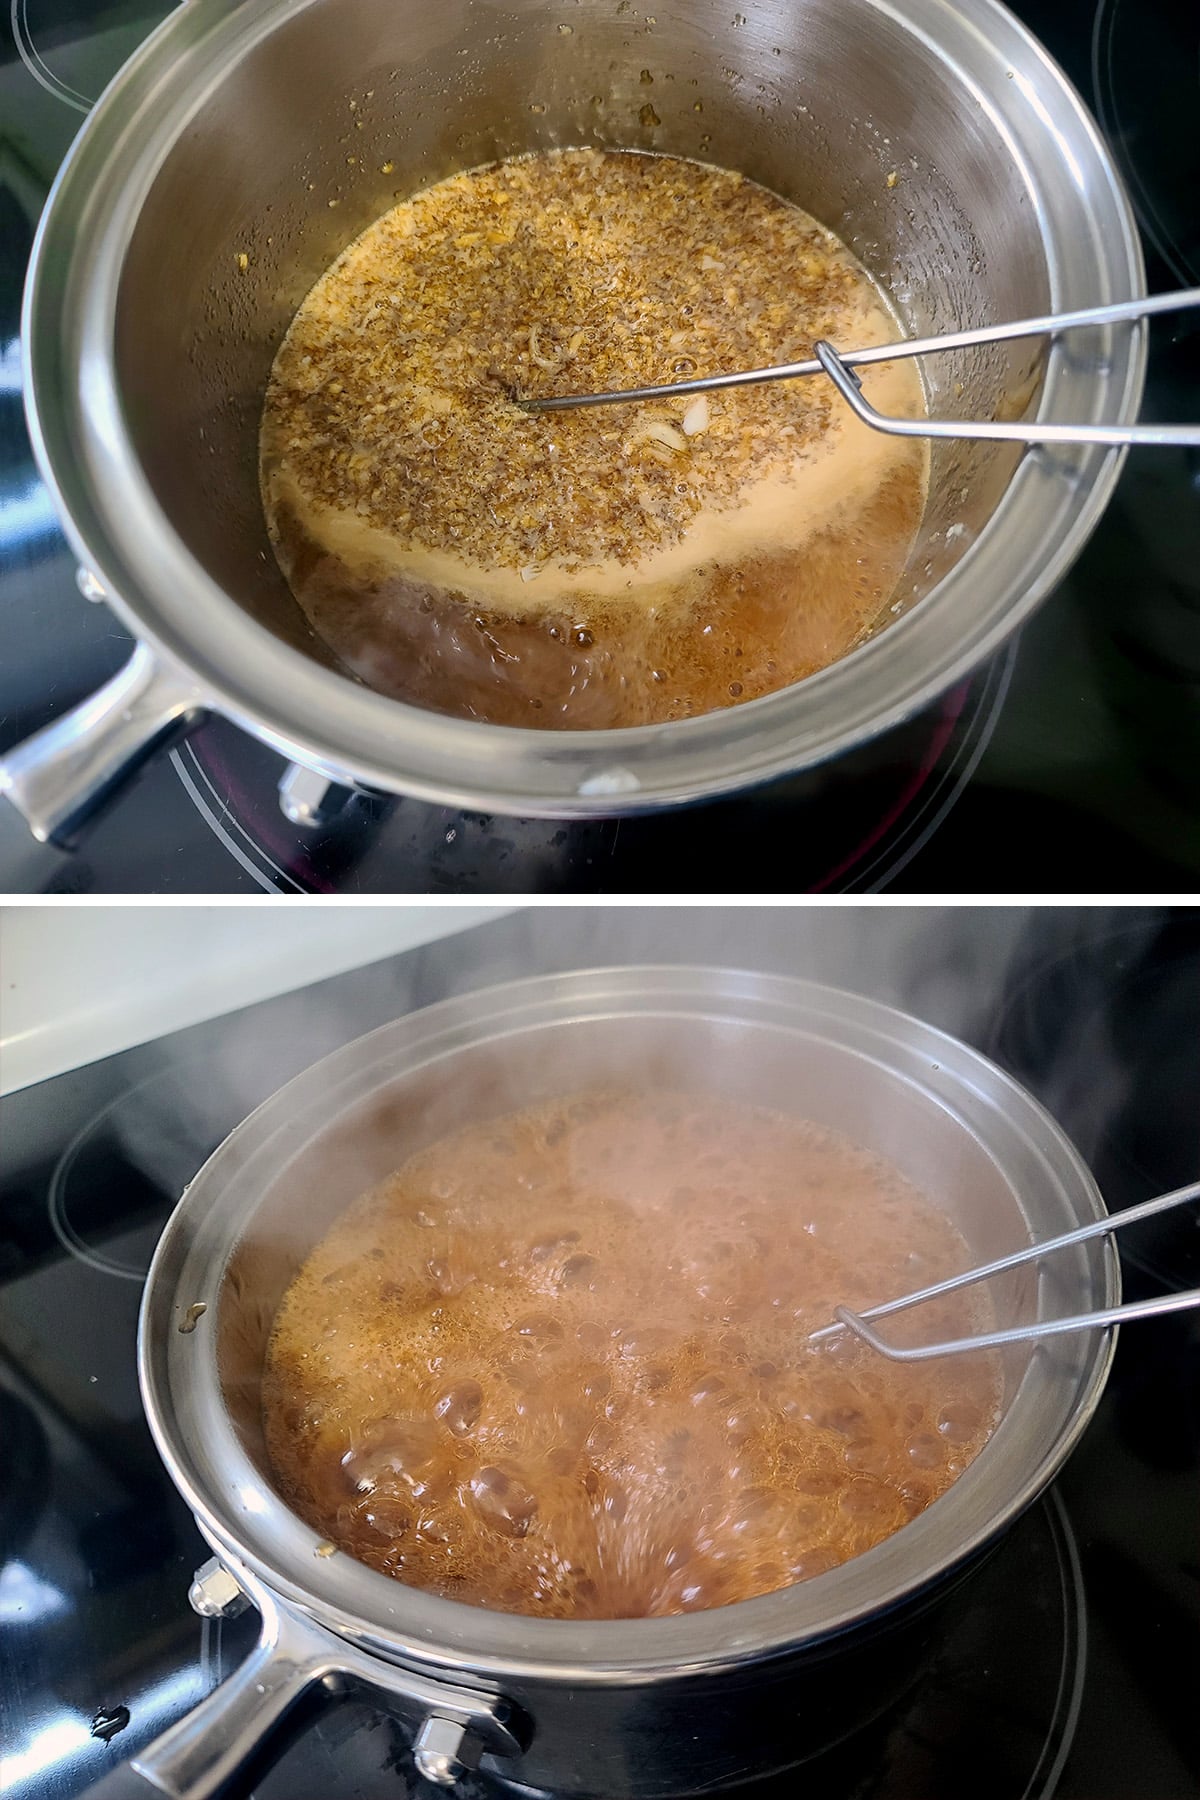 A 2 part image showing the sauce coming to a boil in a pot.